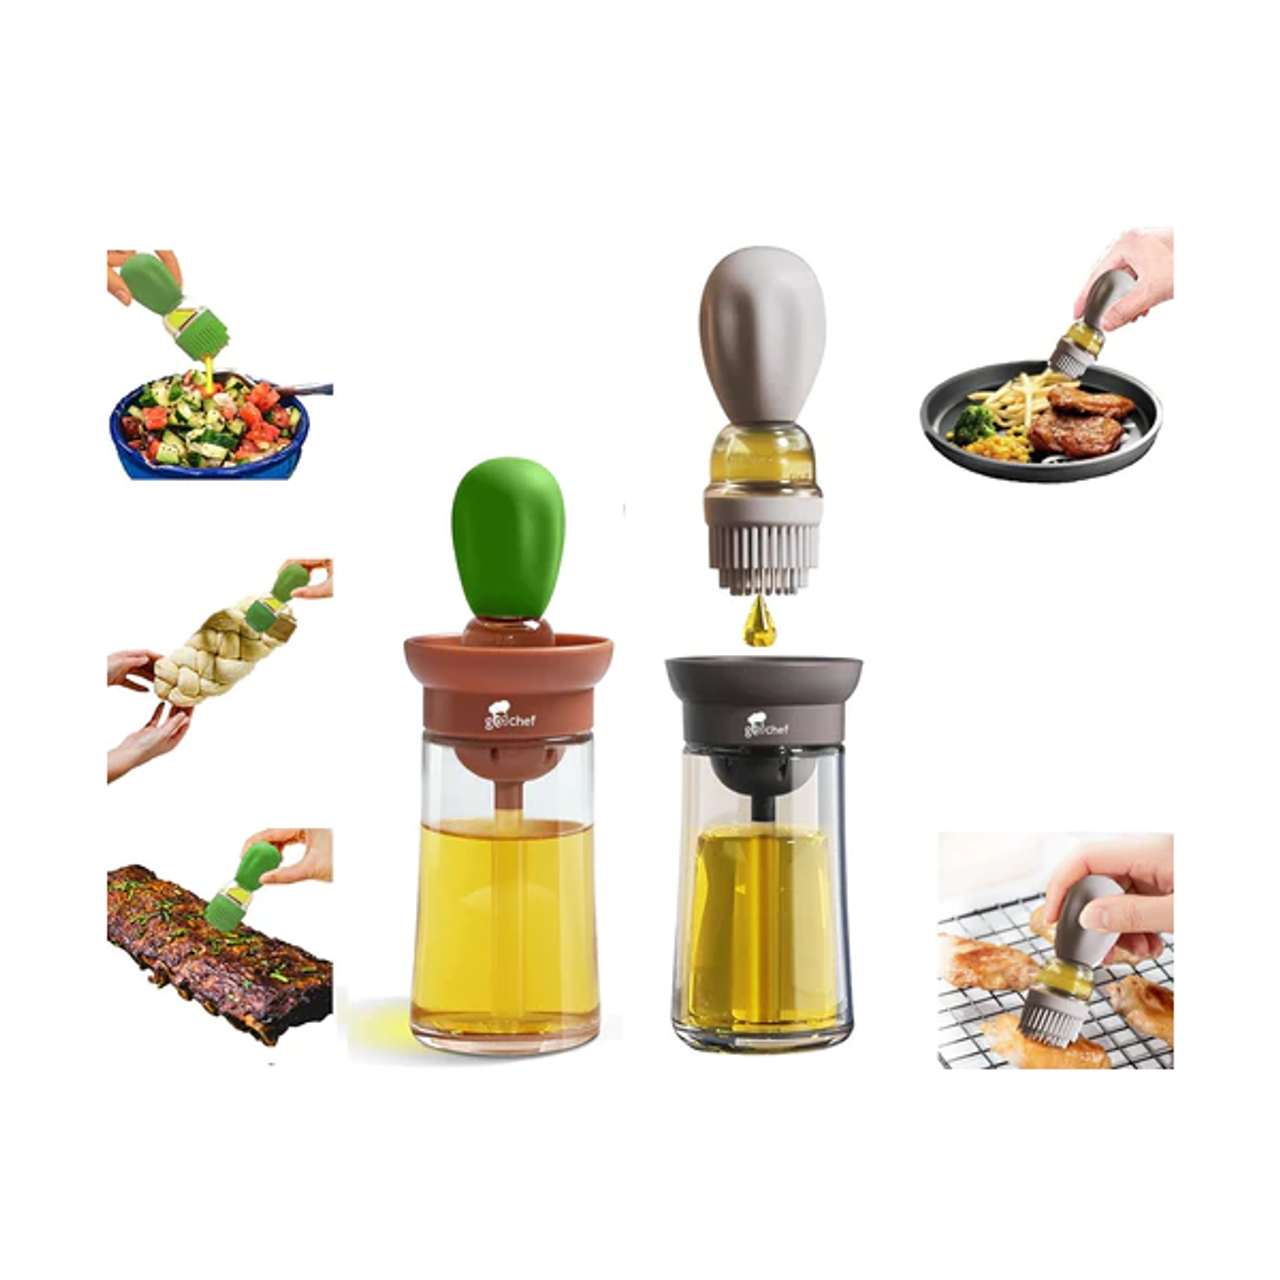 Olive Oil Dispenser Bottle with Silicone Brush (1- or 2-Pack) product image